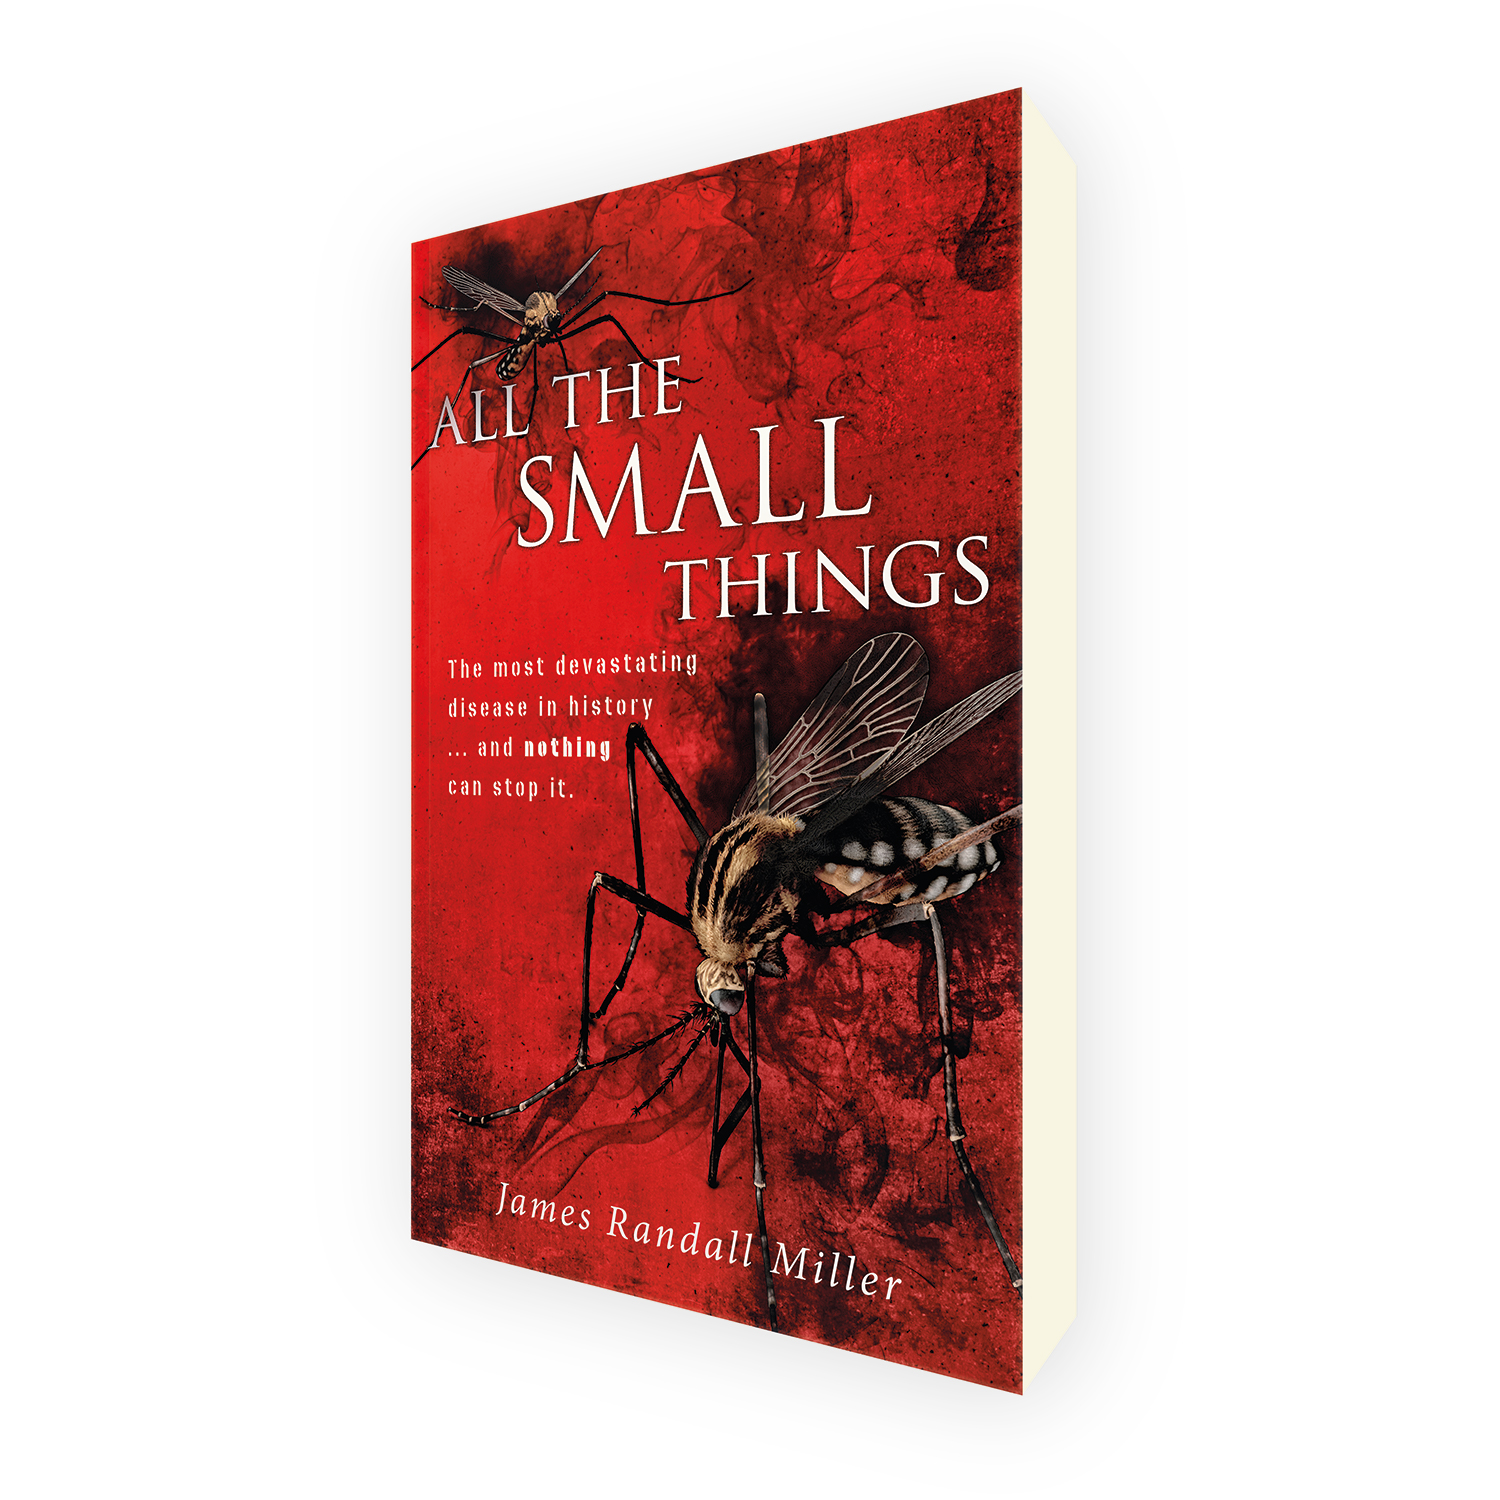 'All The Small Things' is a bespoke cover design for a modern viral thriller novel. The book cover was designed by Mark Thomas, of coverness.com. To find out more about my book design services, please visit www.coverness.com.